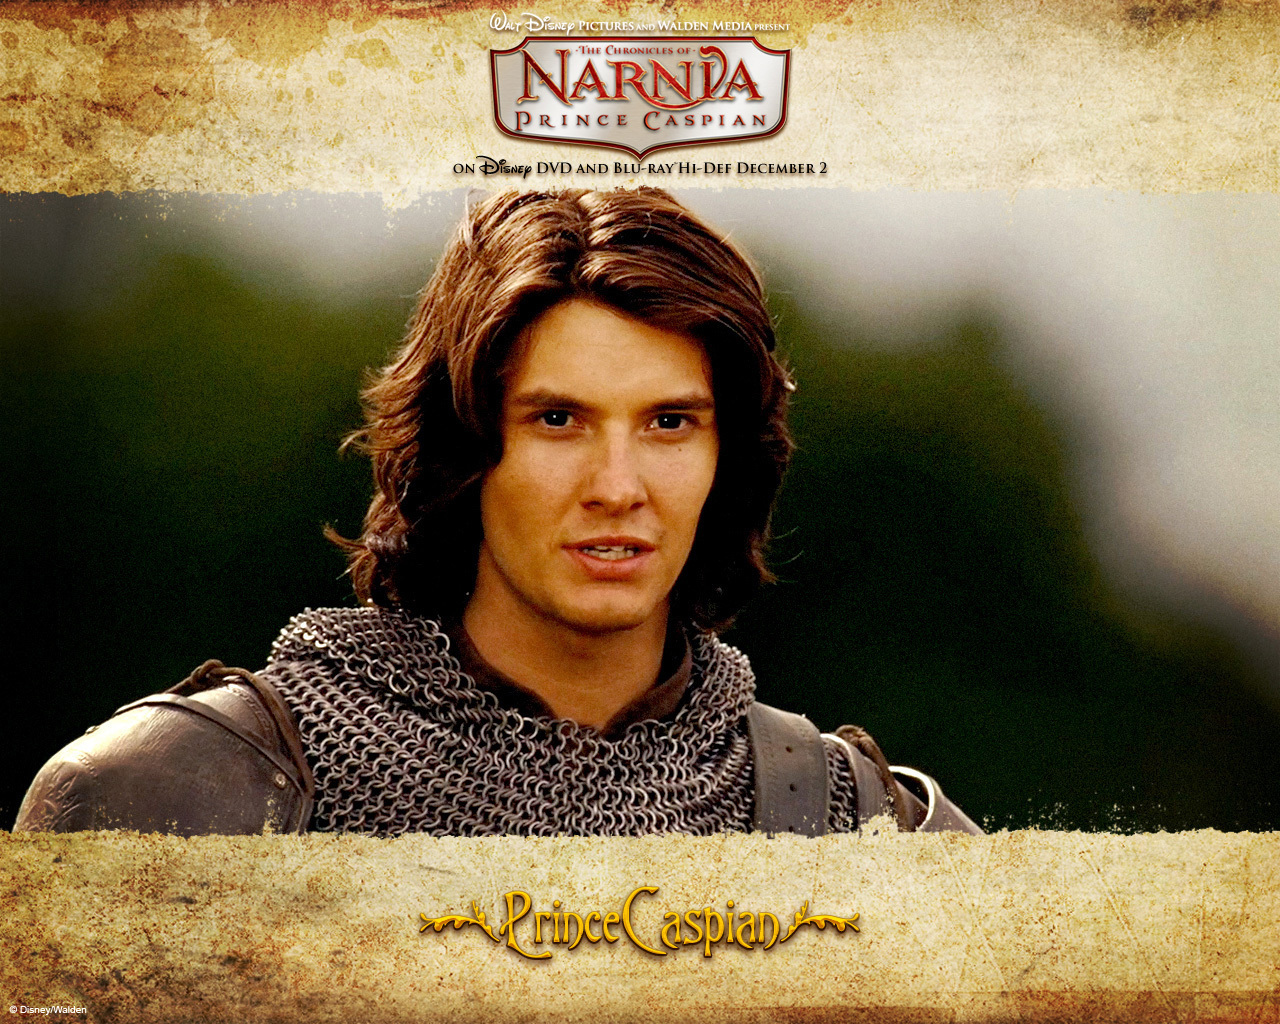 The Chronicles of Narnia: Prince Caspian movies in the Czech republic